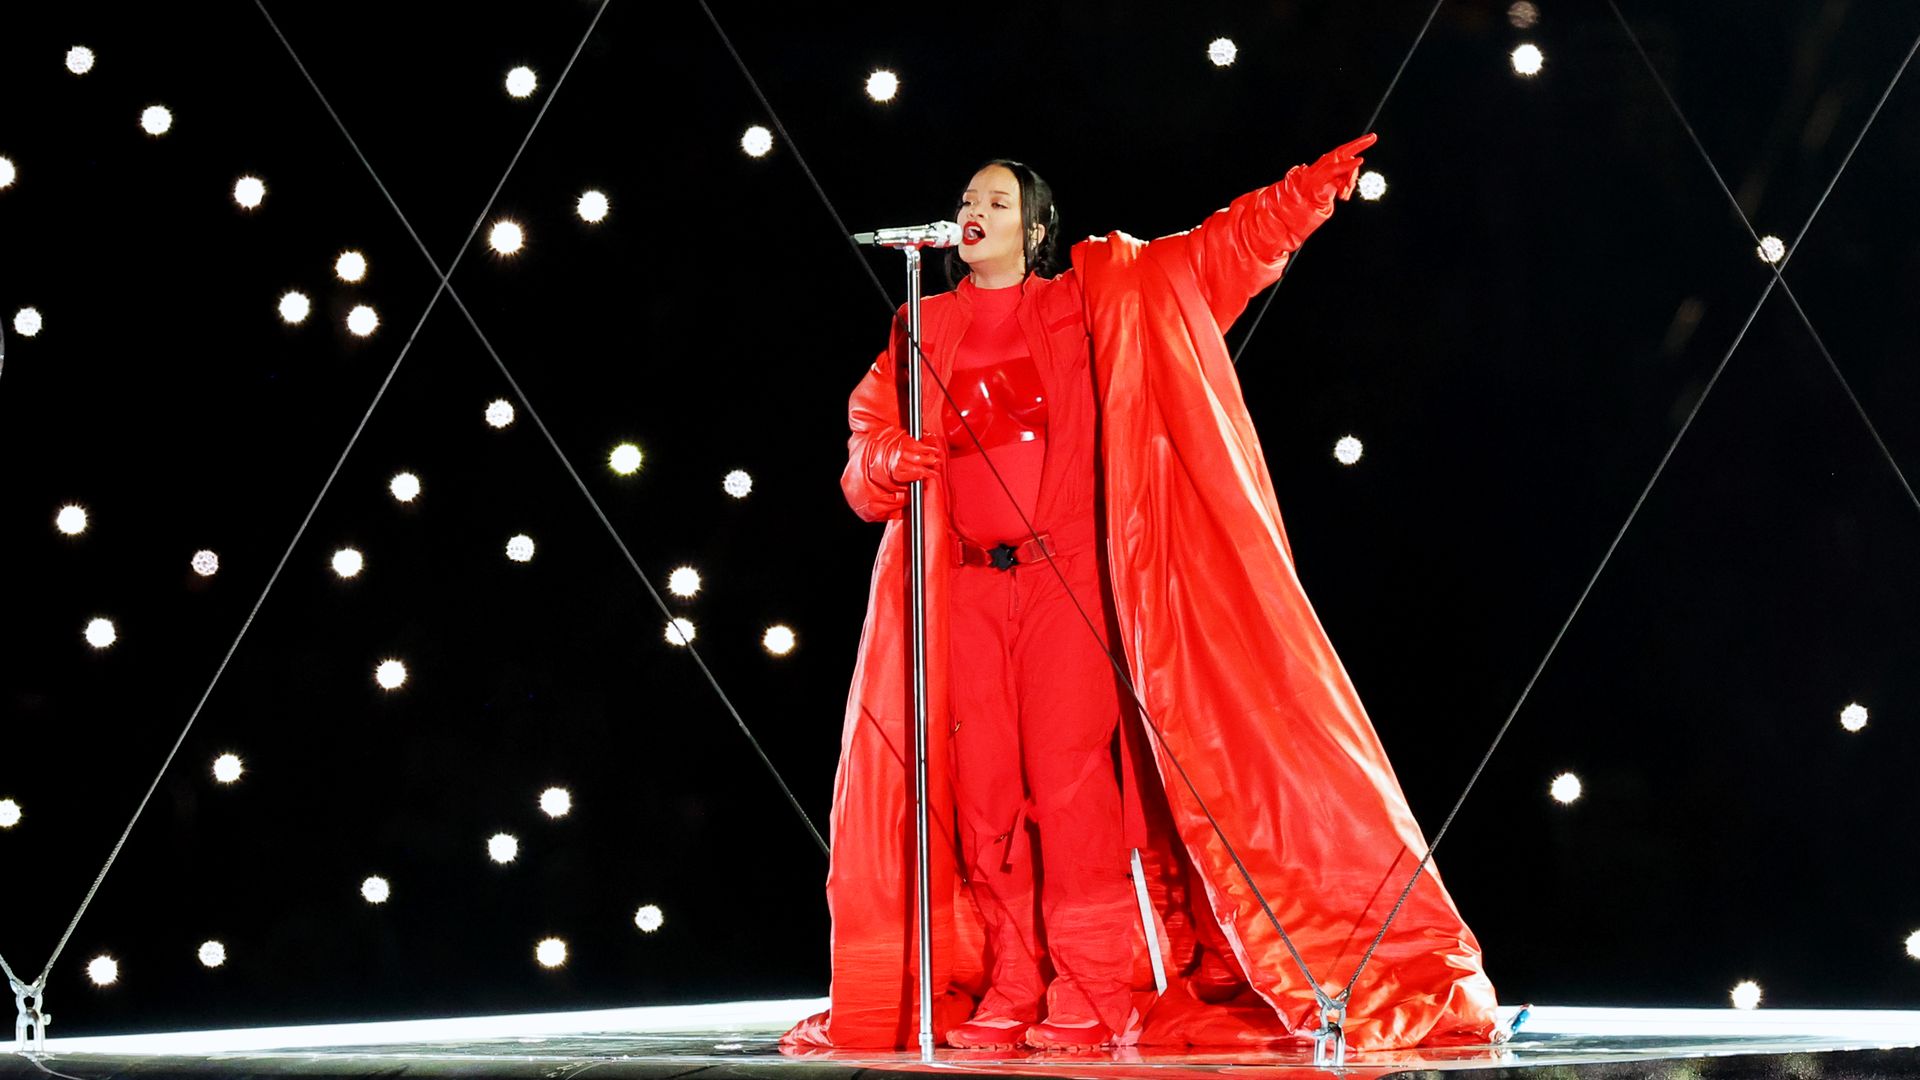 Rihanna sings into a microphone, wearing red from head to toe.